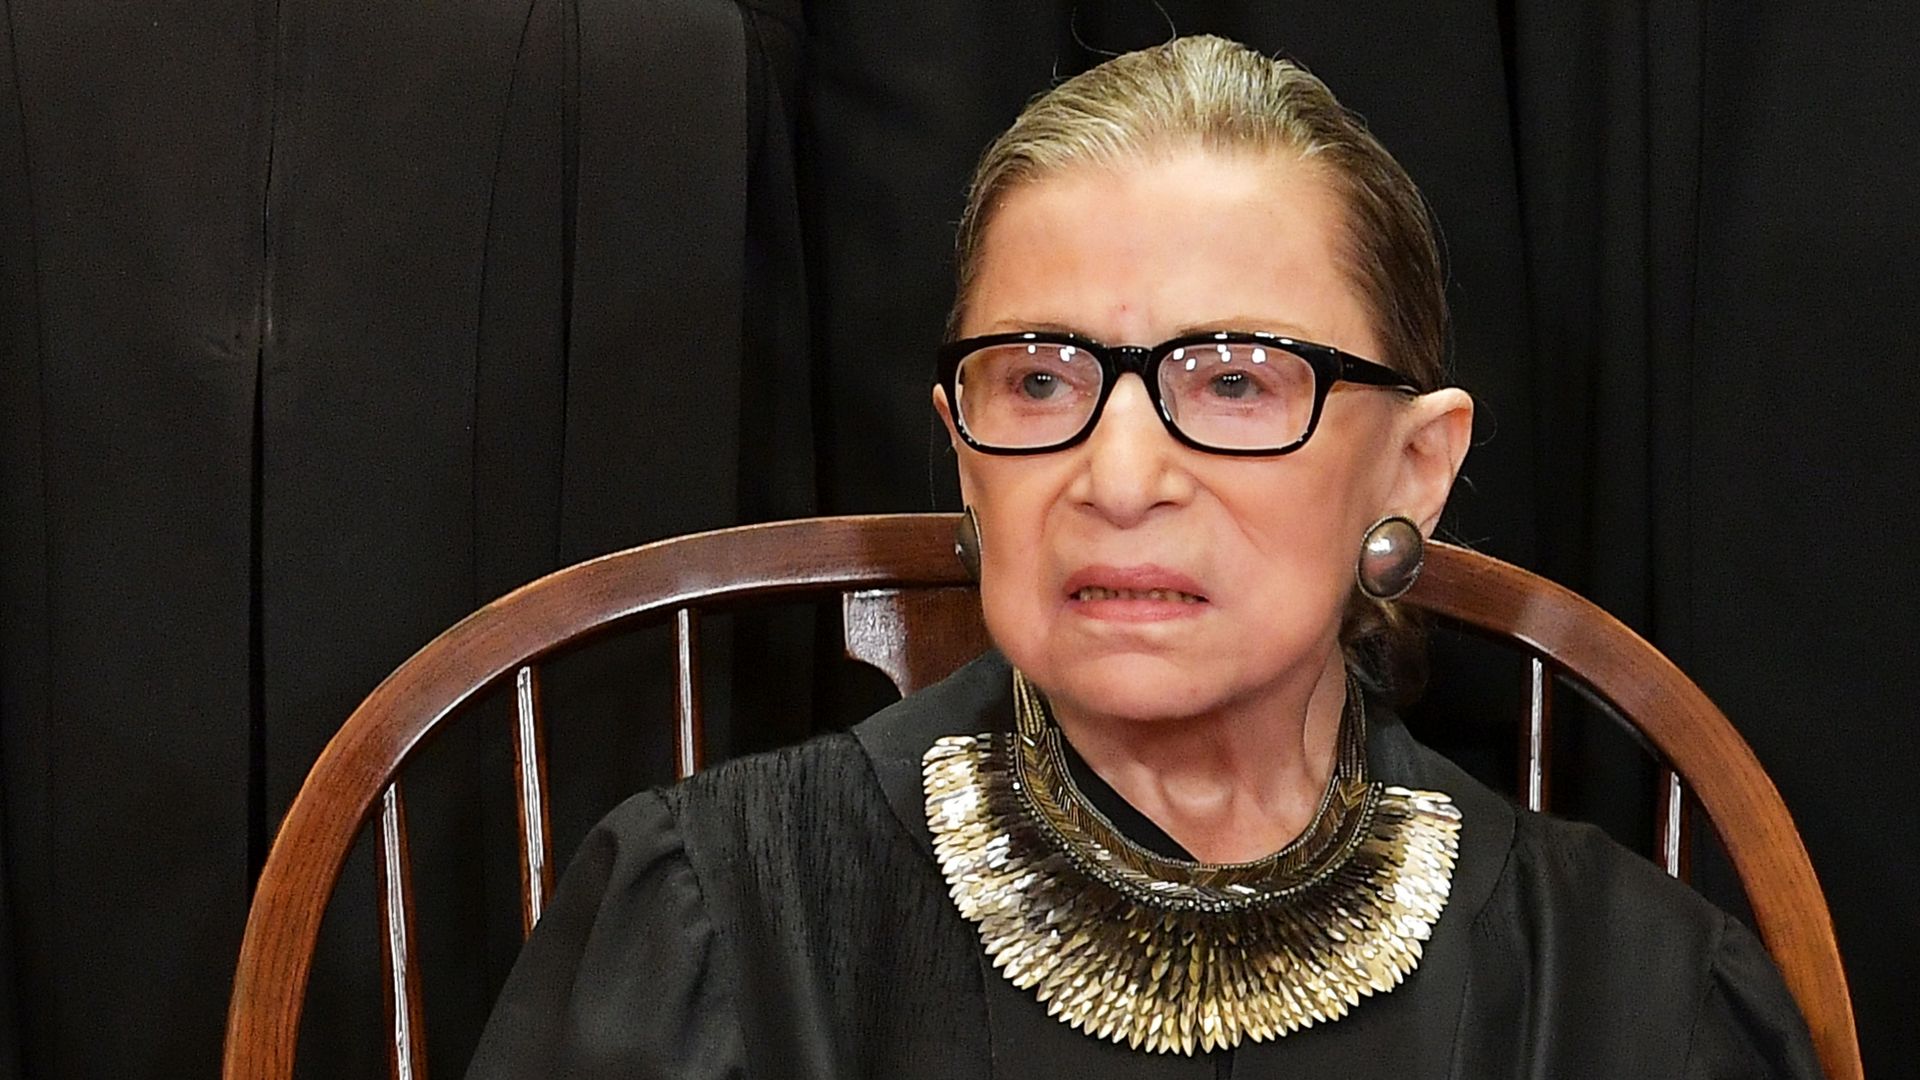 In this image, Ginsburg sits in a chair.